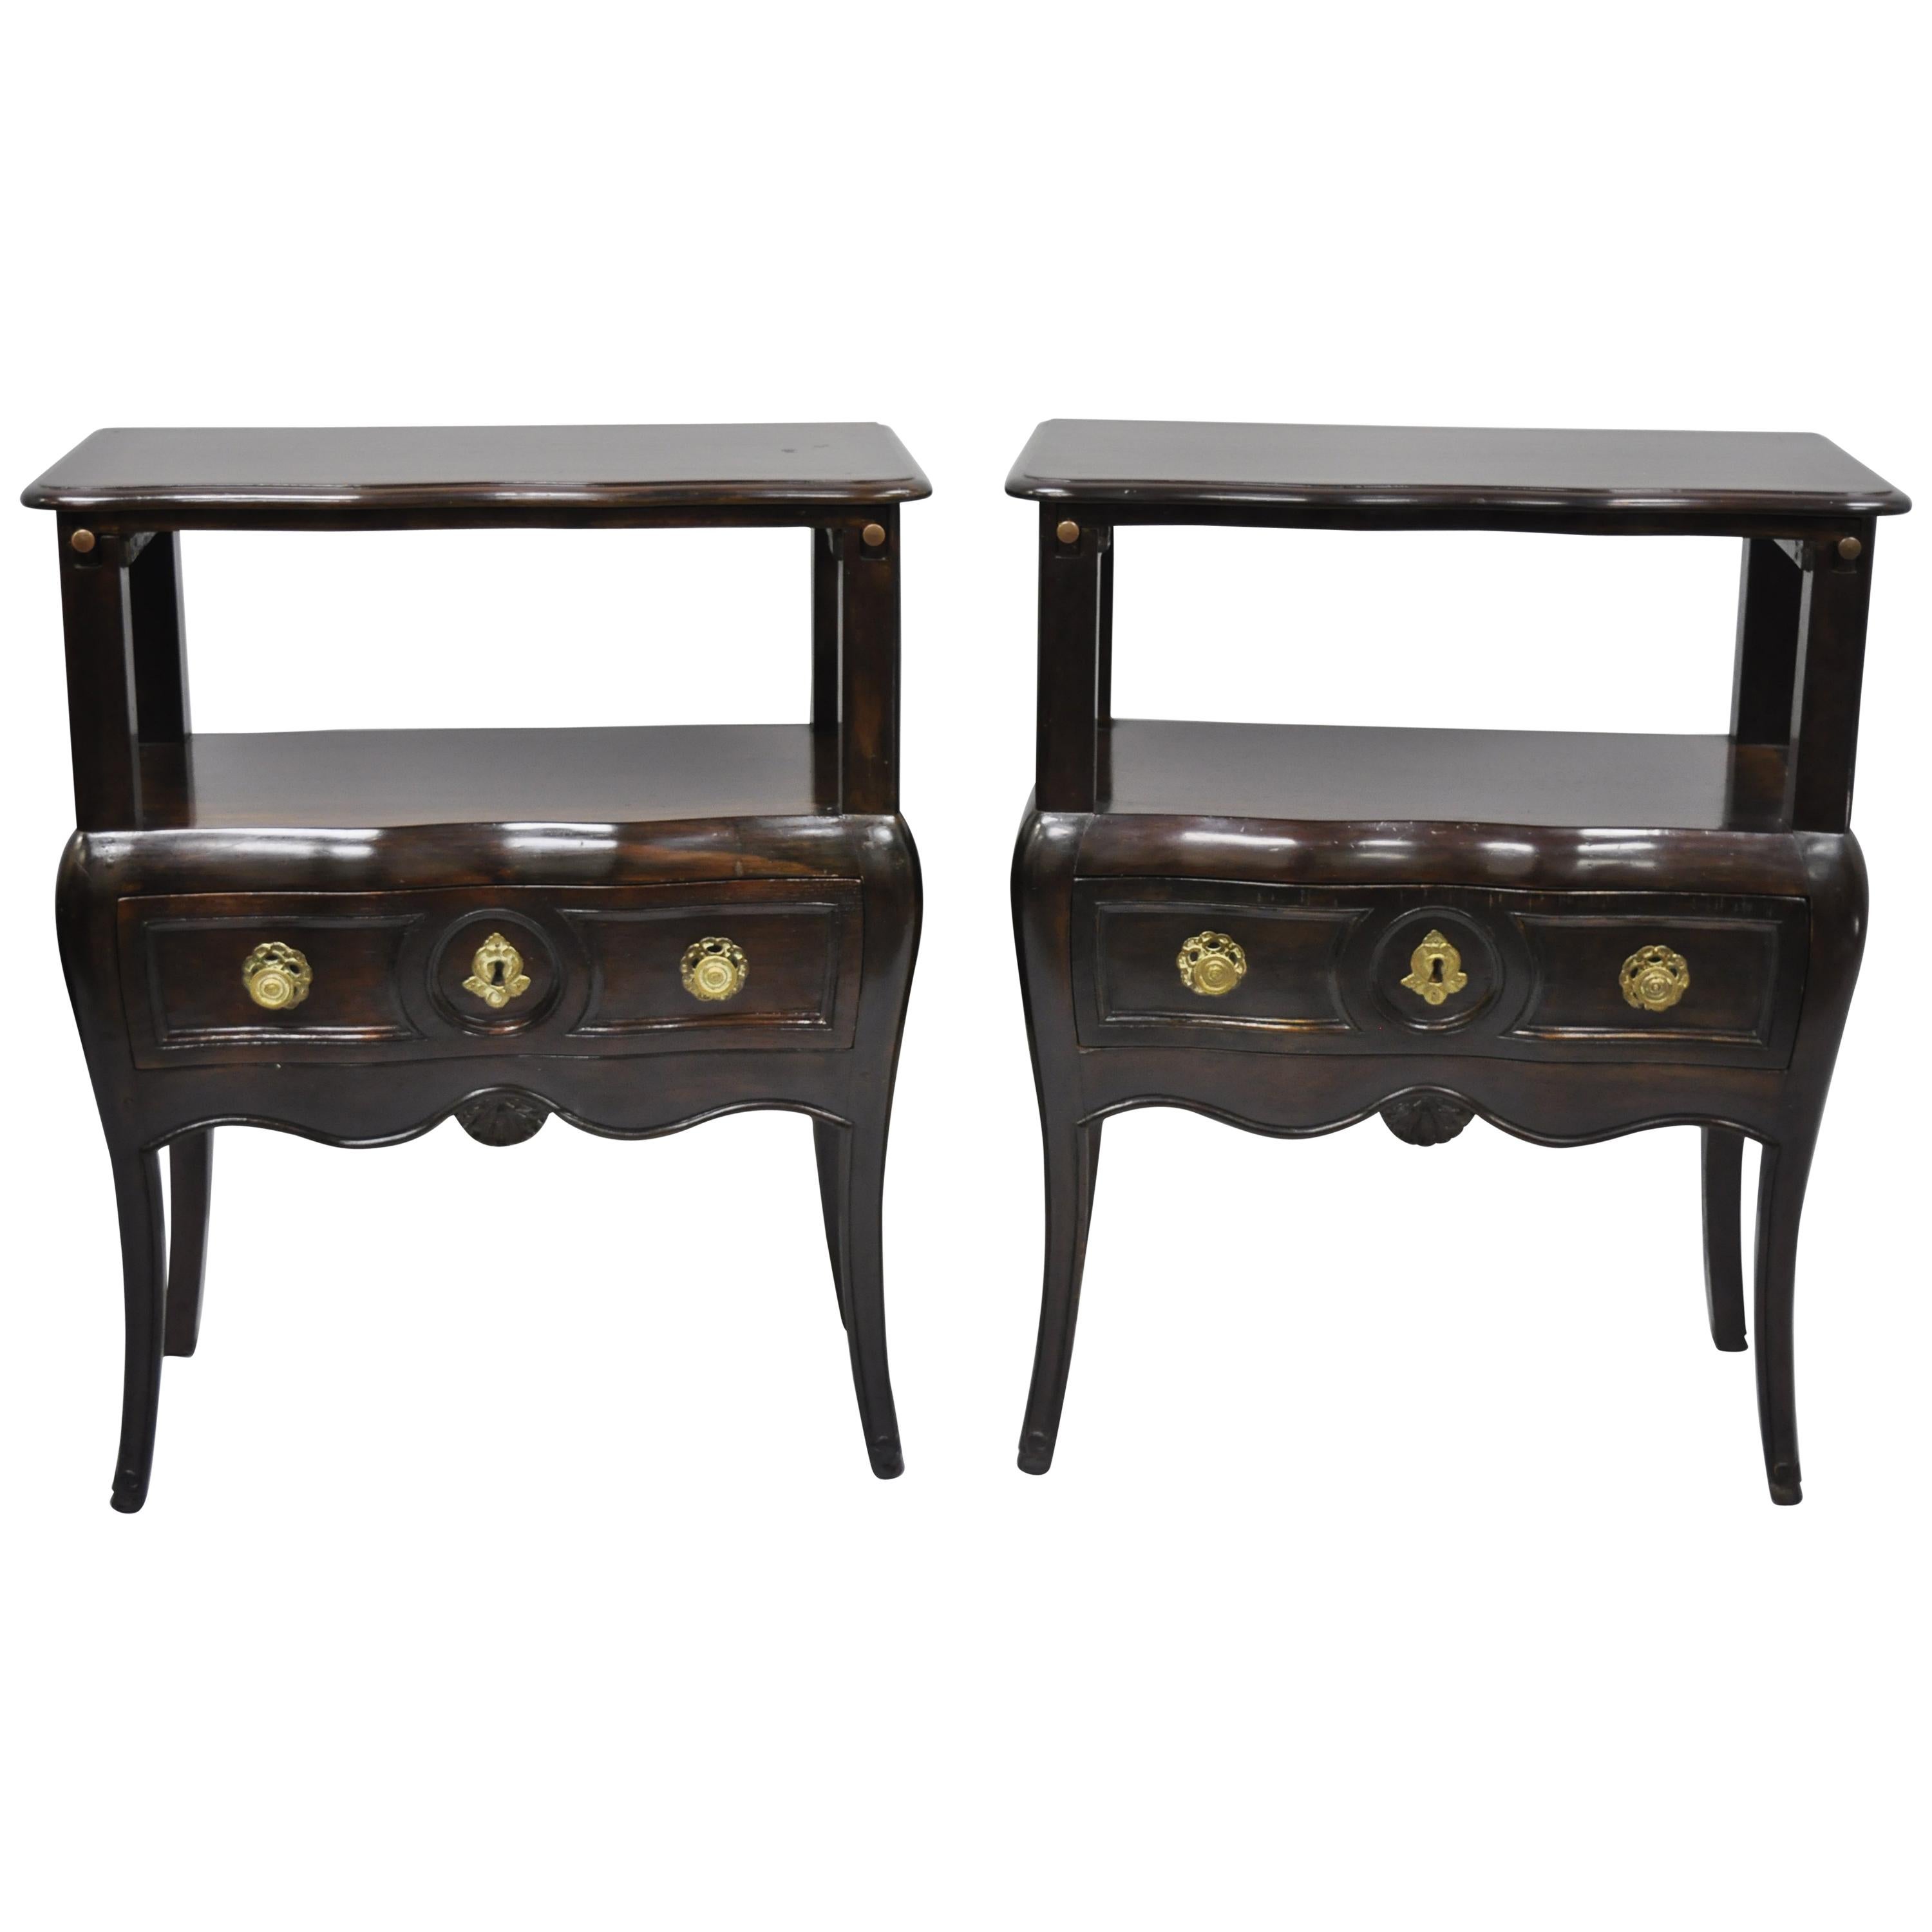 Pair of French Country Provincial Style Bombe Nightstand Attributed to Auffray